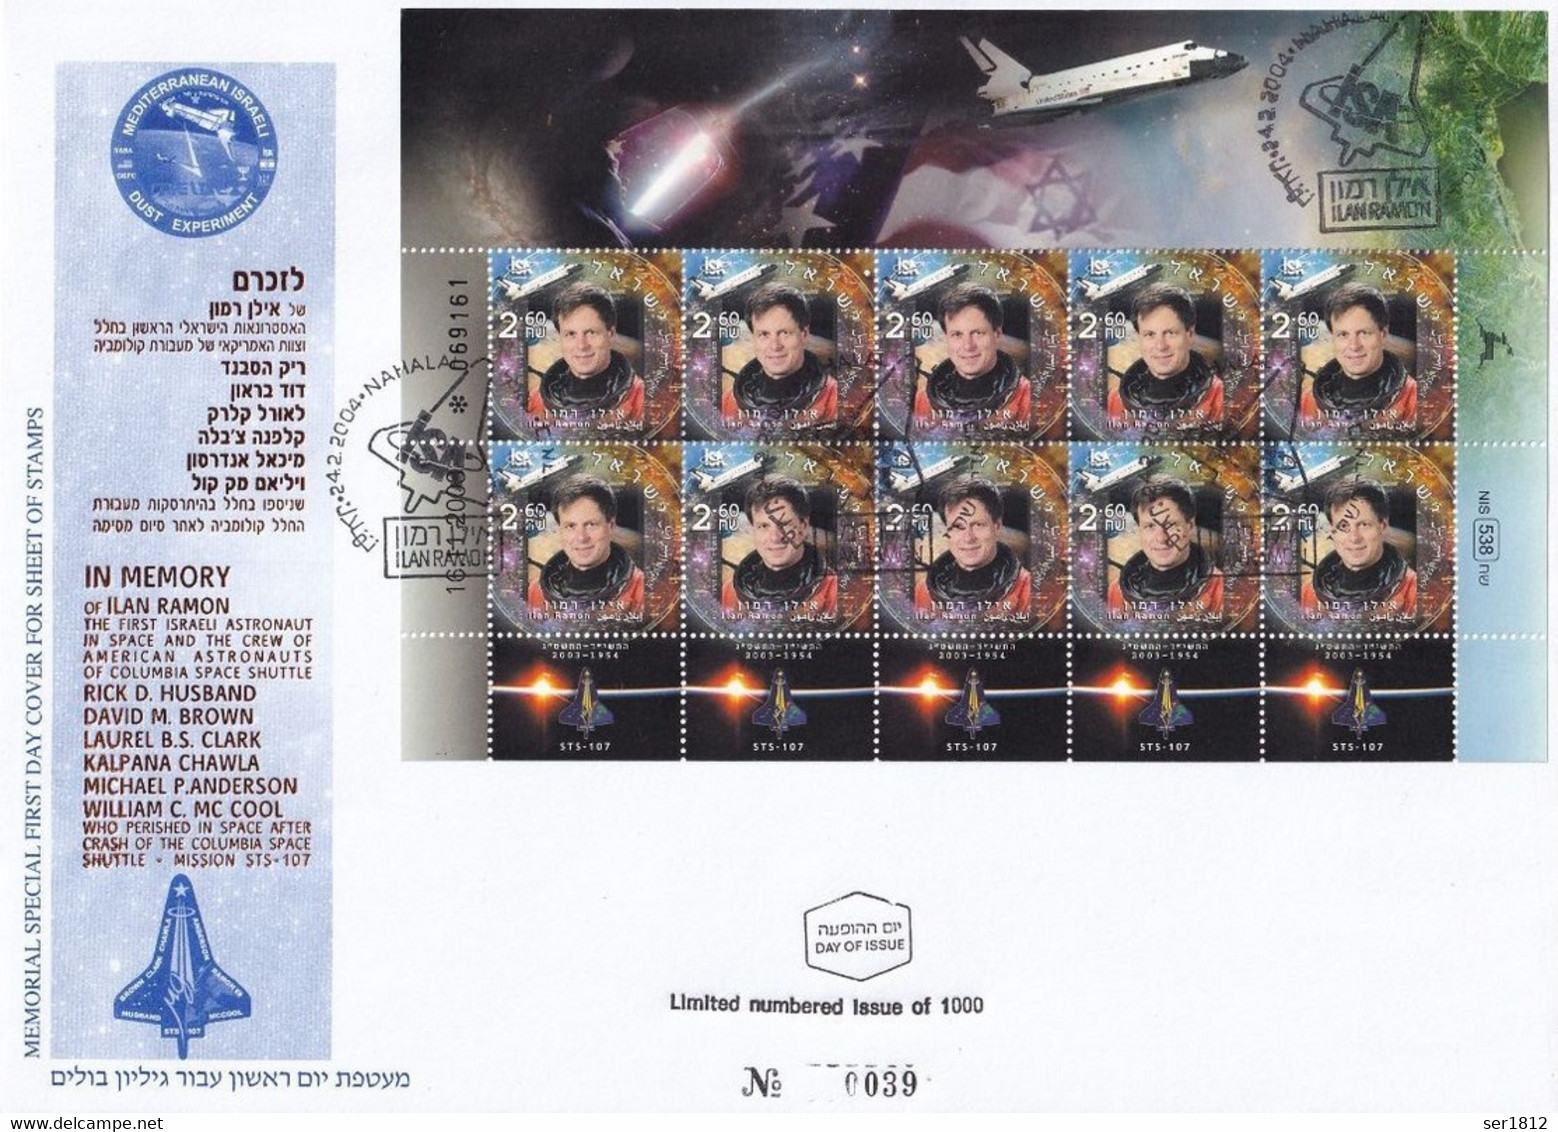 ISRAEL 2004 SPACE COVER ENVELOPE FDC SHUTTLE MISSIN STS 107 ILAN RAMON - Covers & Documents